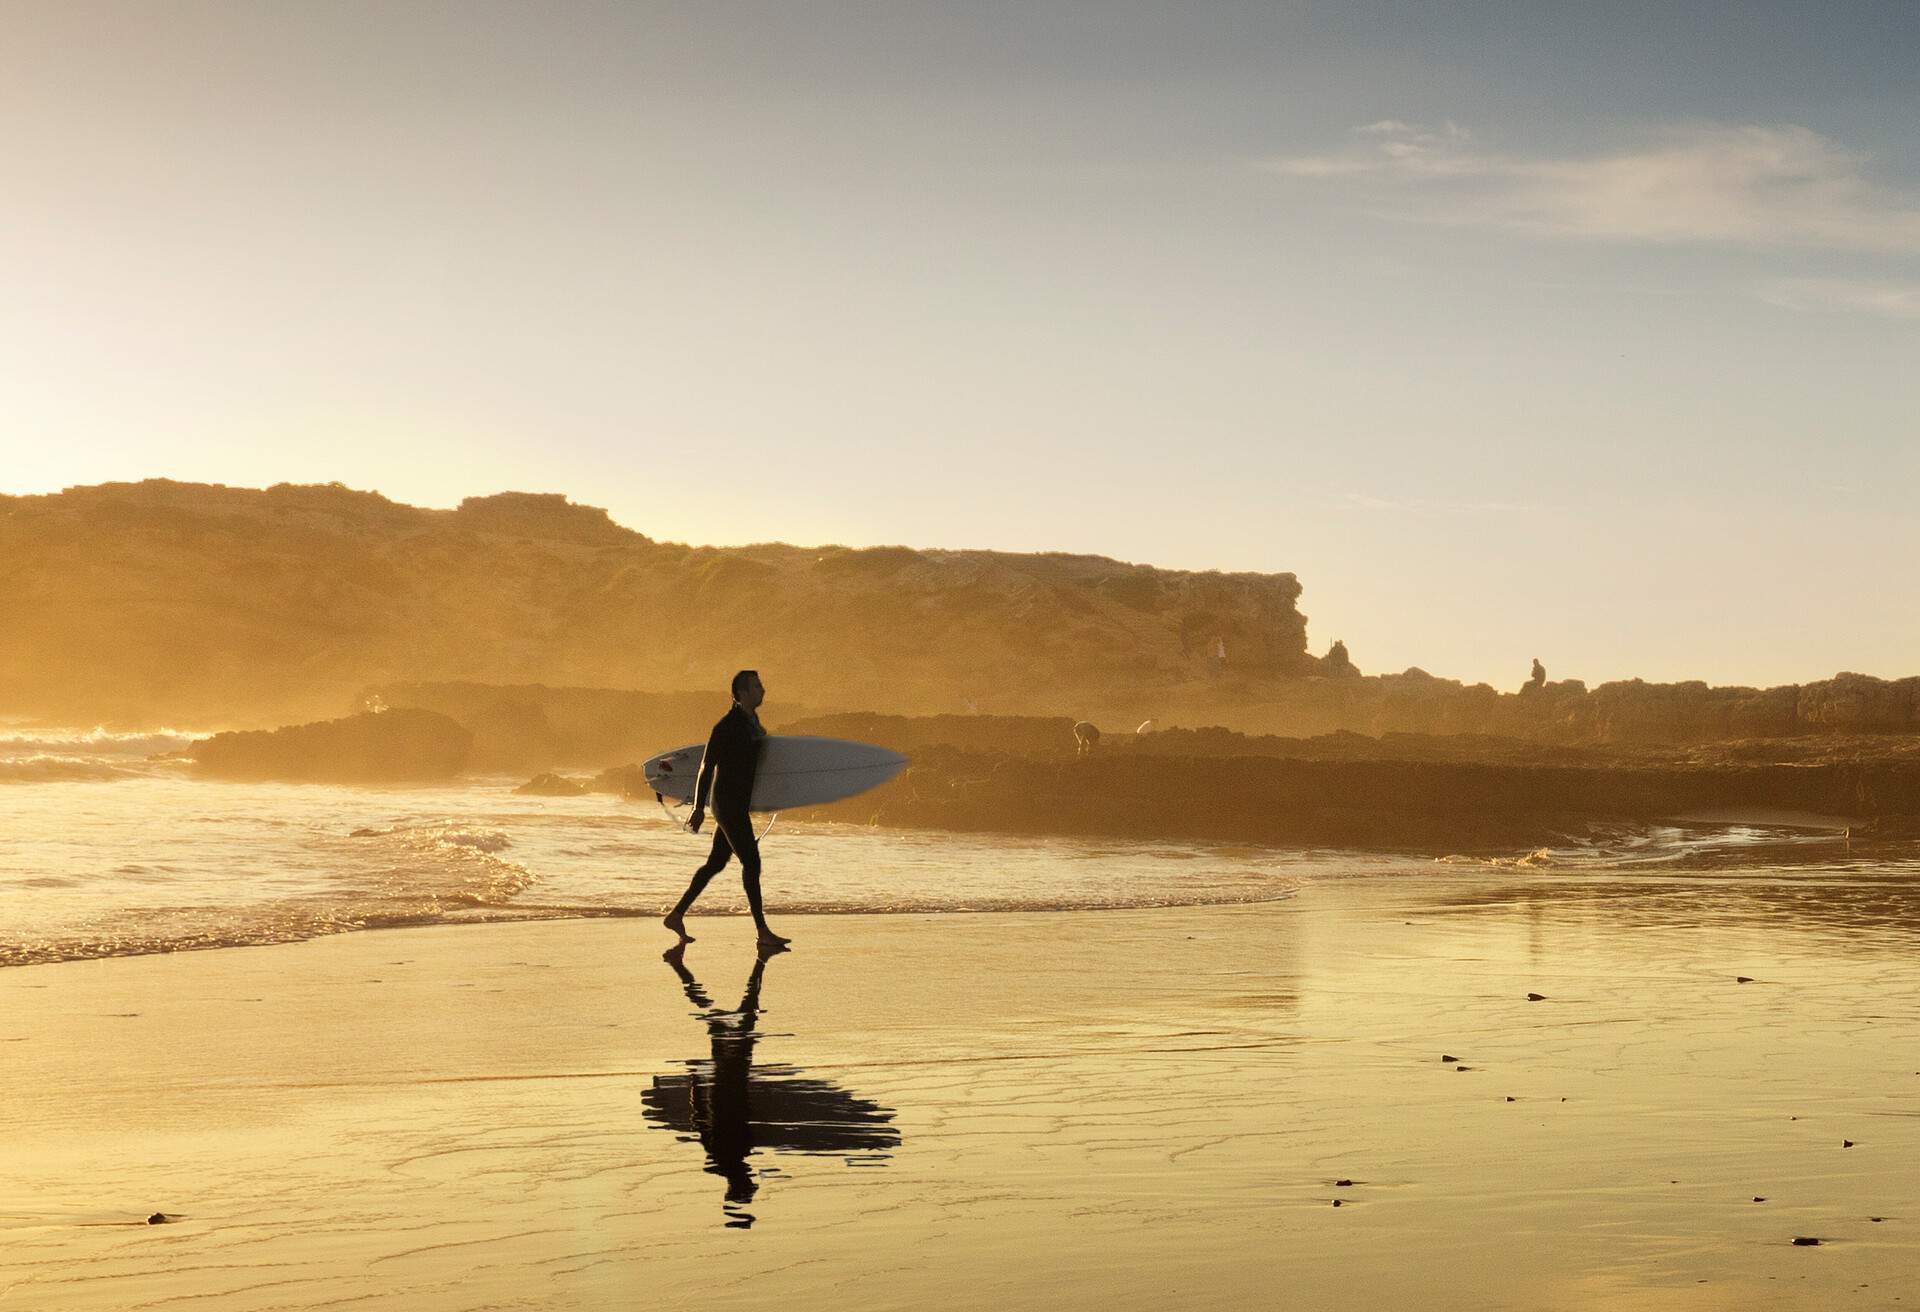 A surfer in golden sunset light is coming out of the water. His silhouette is reflecting on the beach